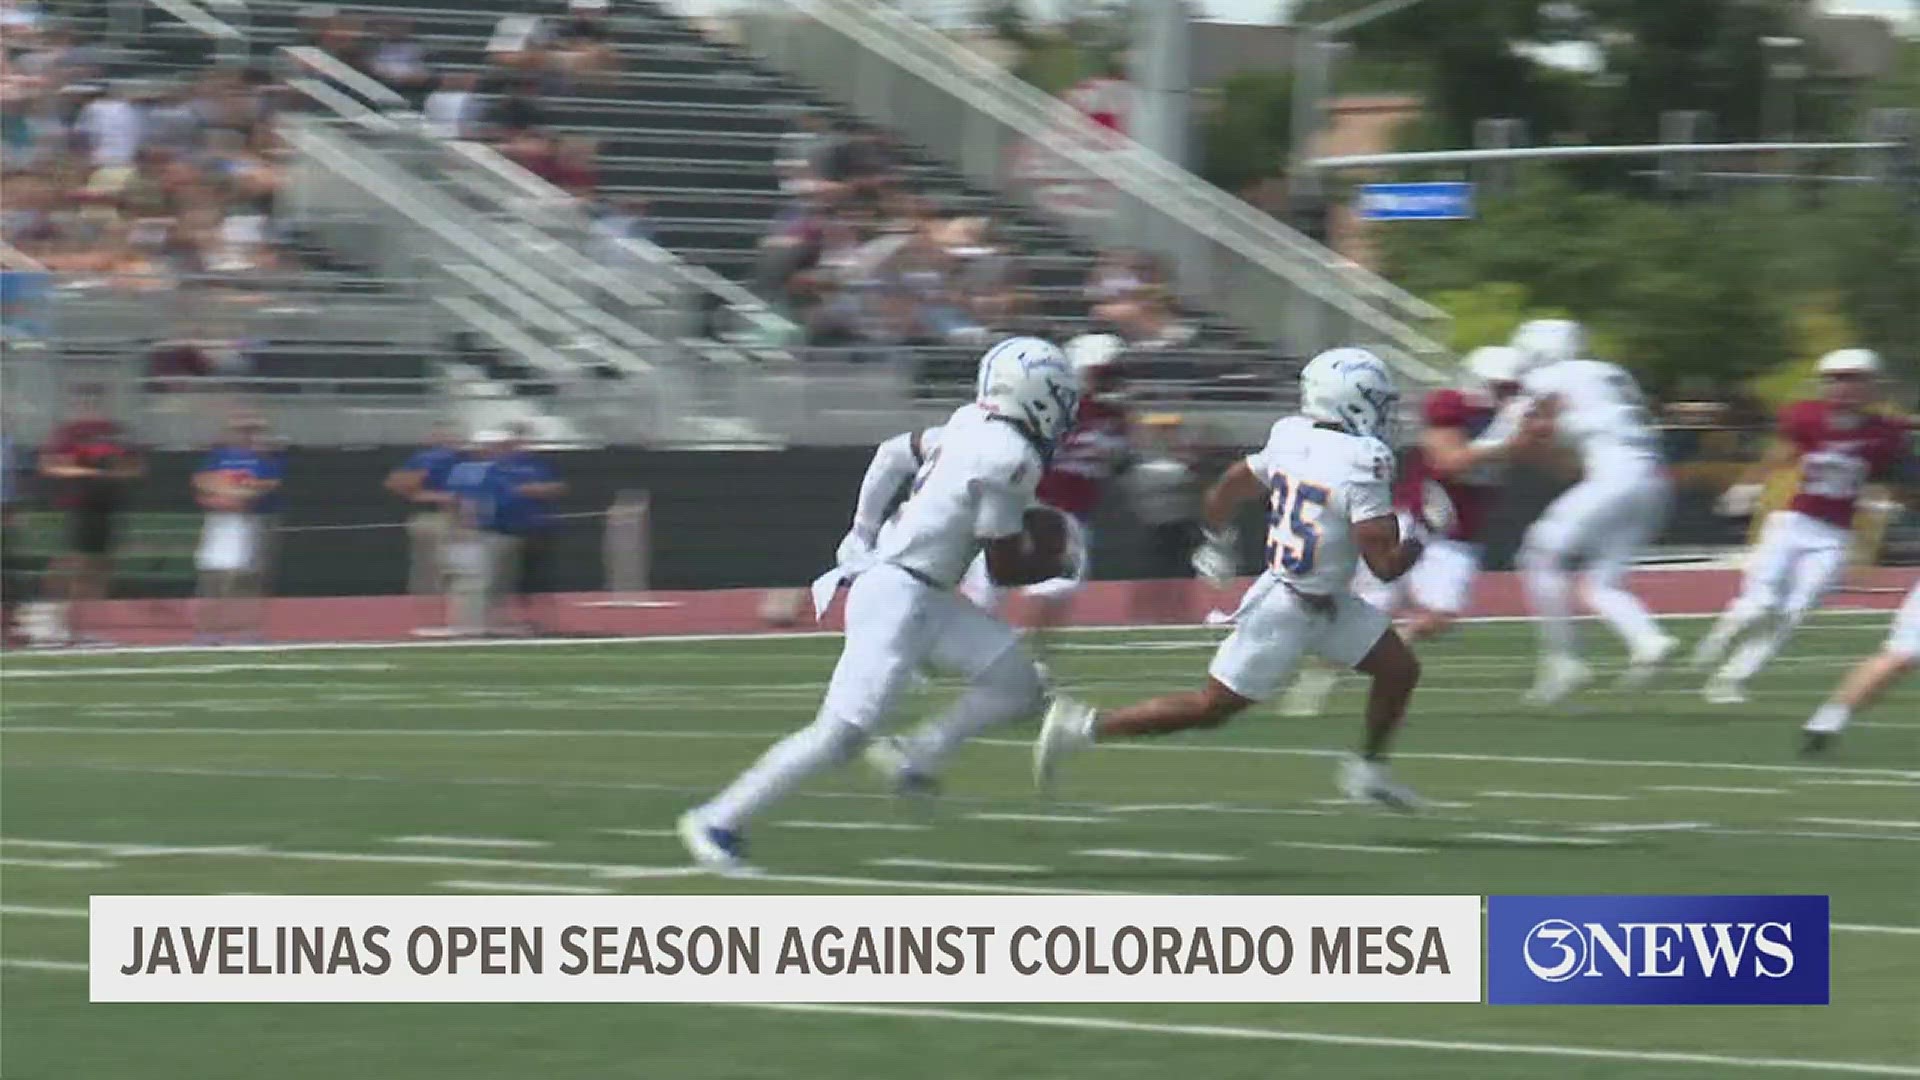 The Javelinas traveled to Colorado Mesa to get their first win of the season, 30-10.